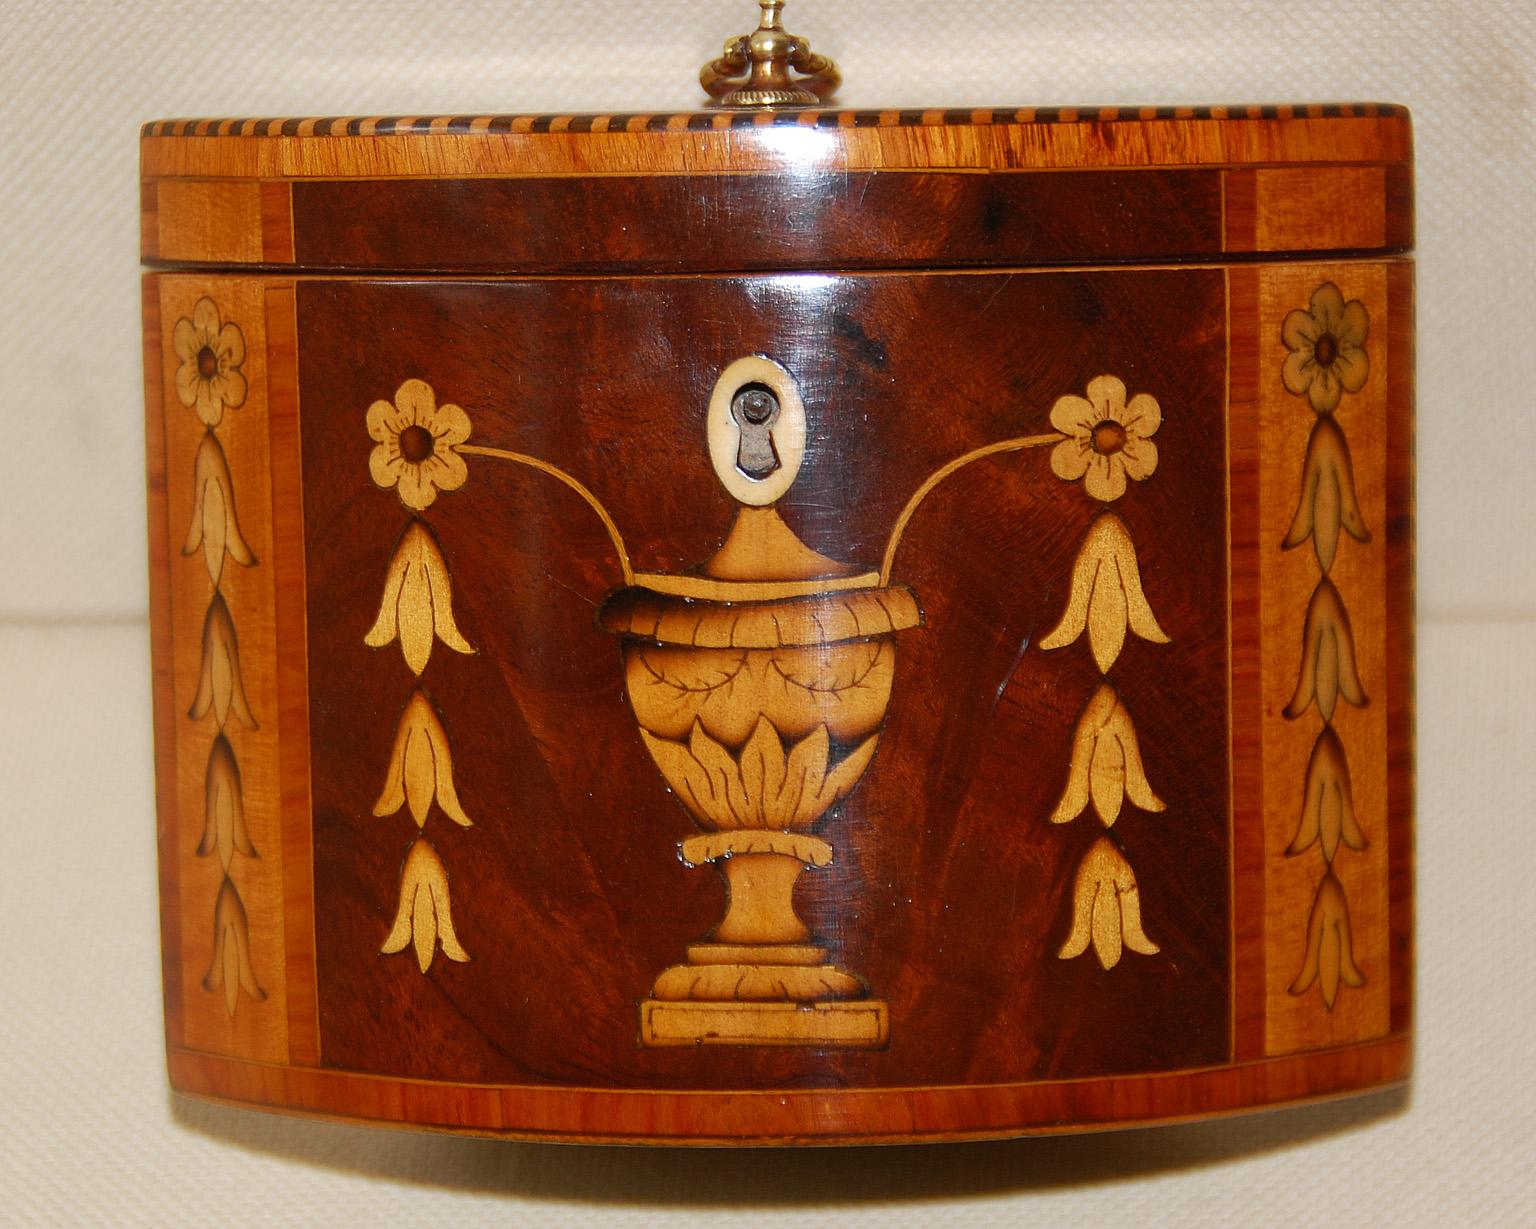 English Georgian 18th century oval tea caddy with urn, flower and husk inlays. This unusual oval caddy has acute angles at both ends which frame the inlays of the front. The mahogany top has fan inlay in boxwood with tulipwood crossbanding and rope